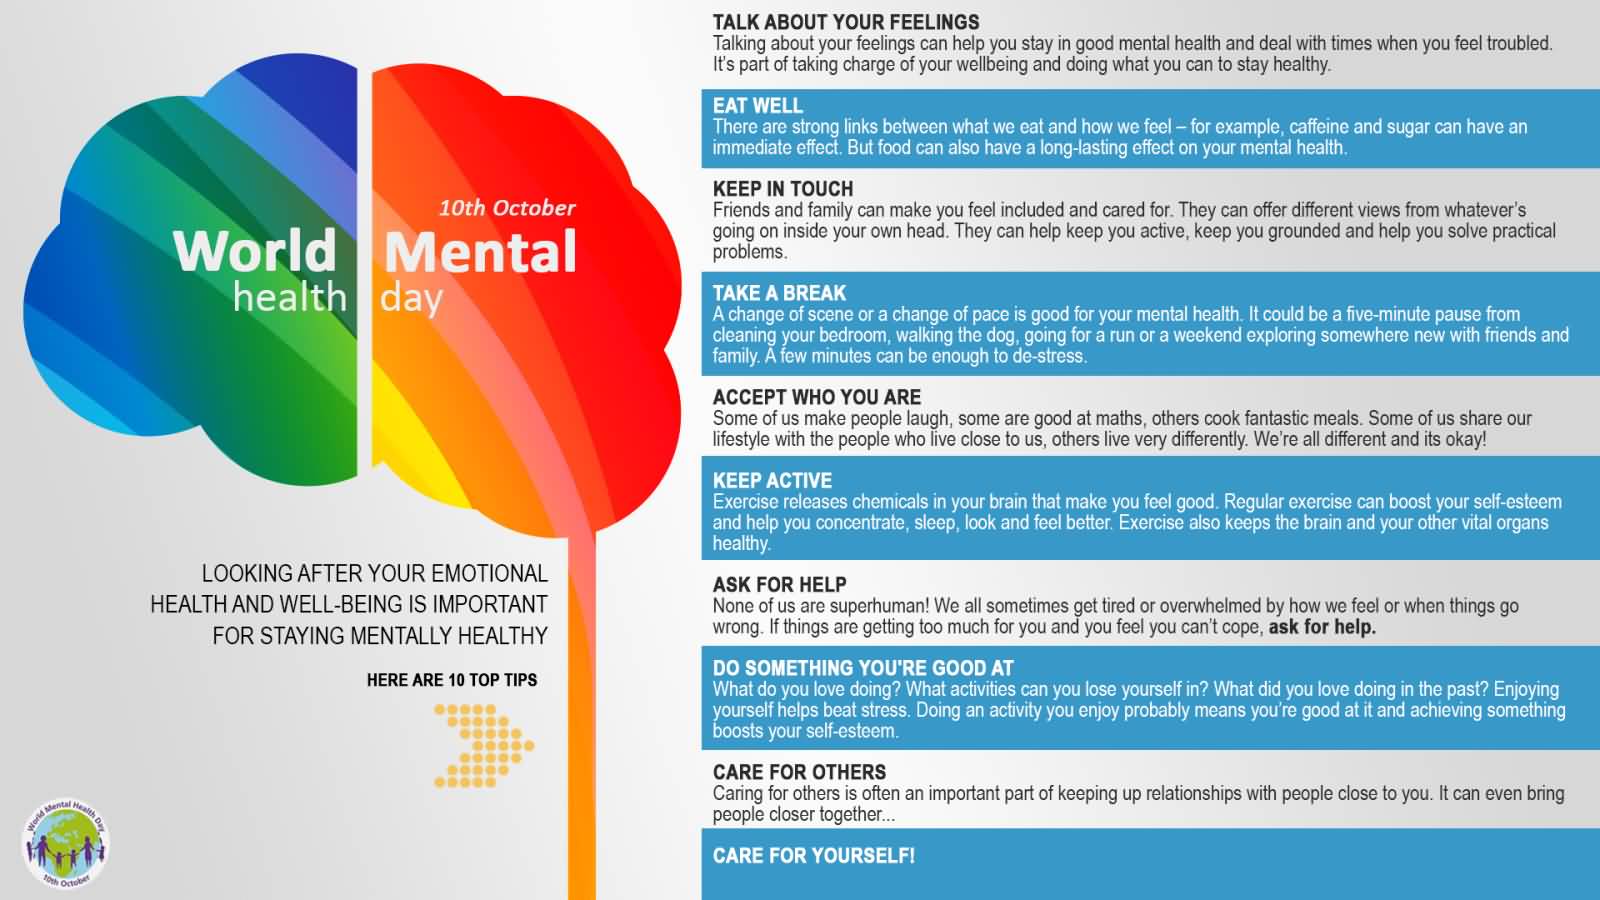 10th October Is World Mental Health Day Tip For Staying Mentally Healthy